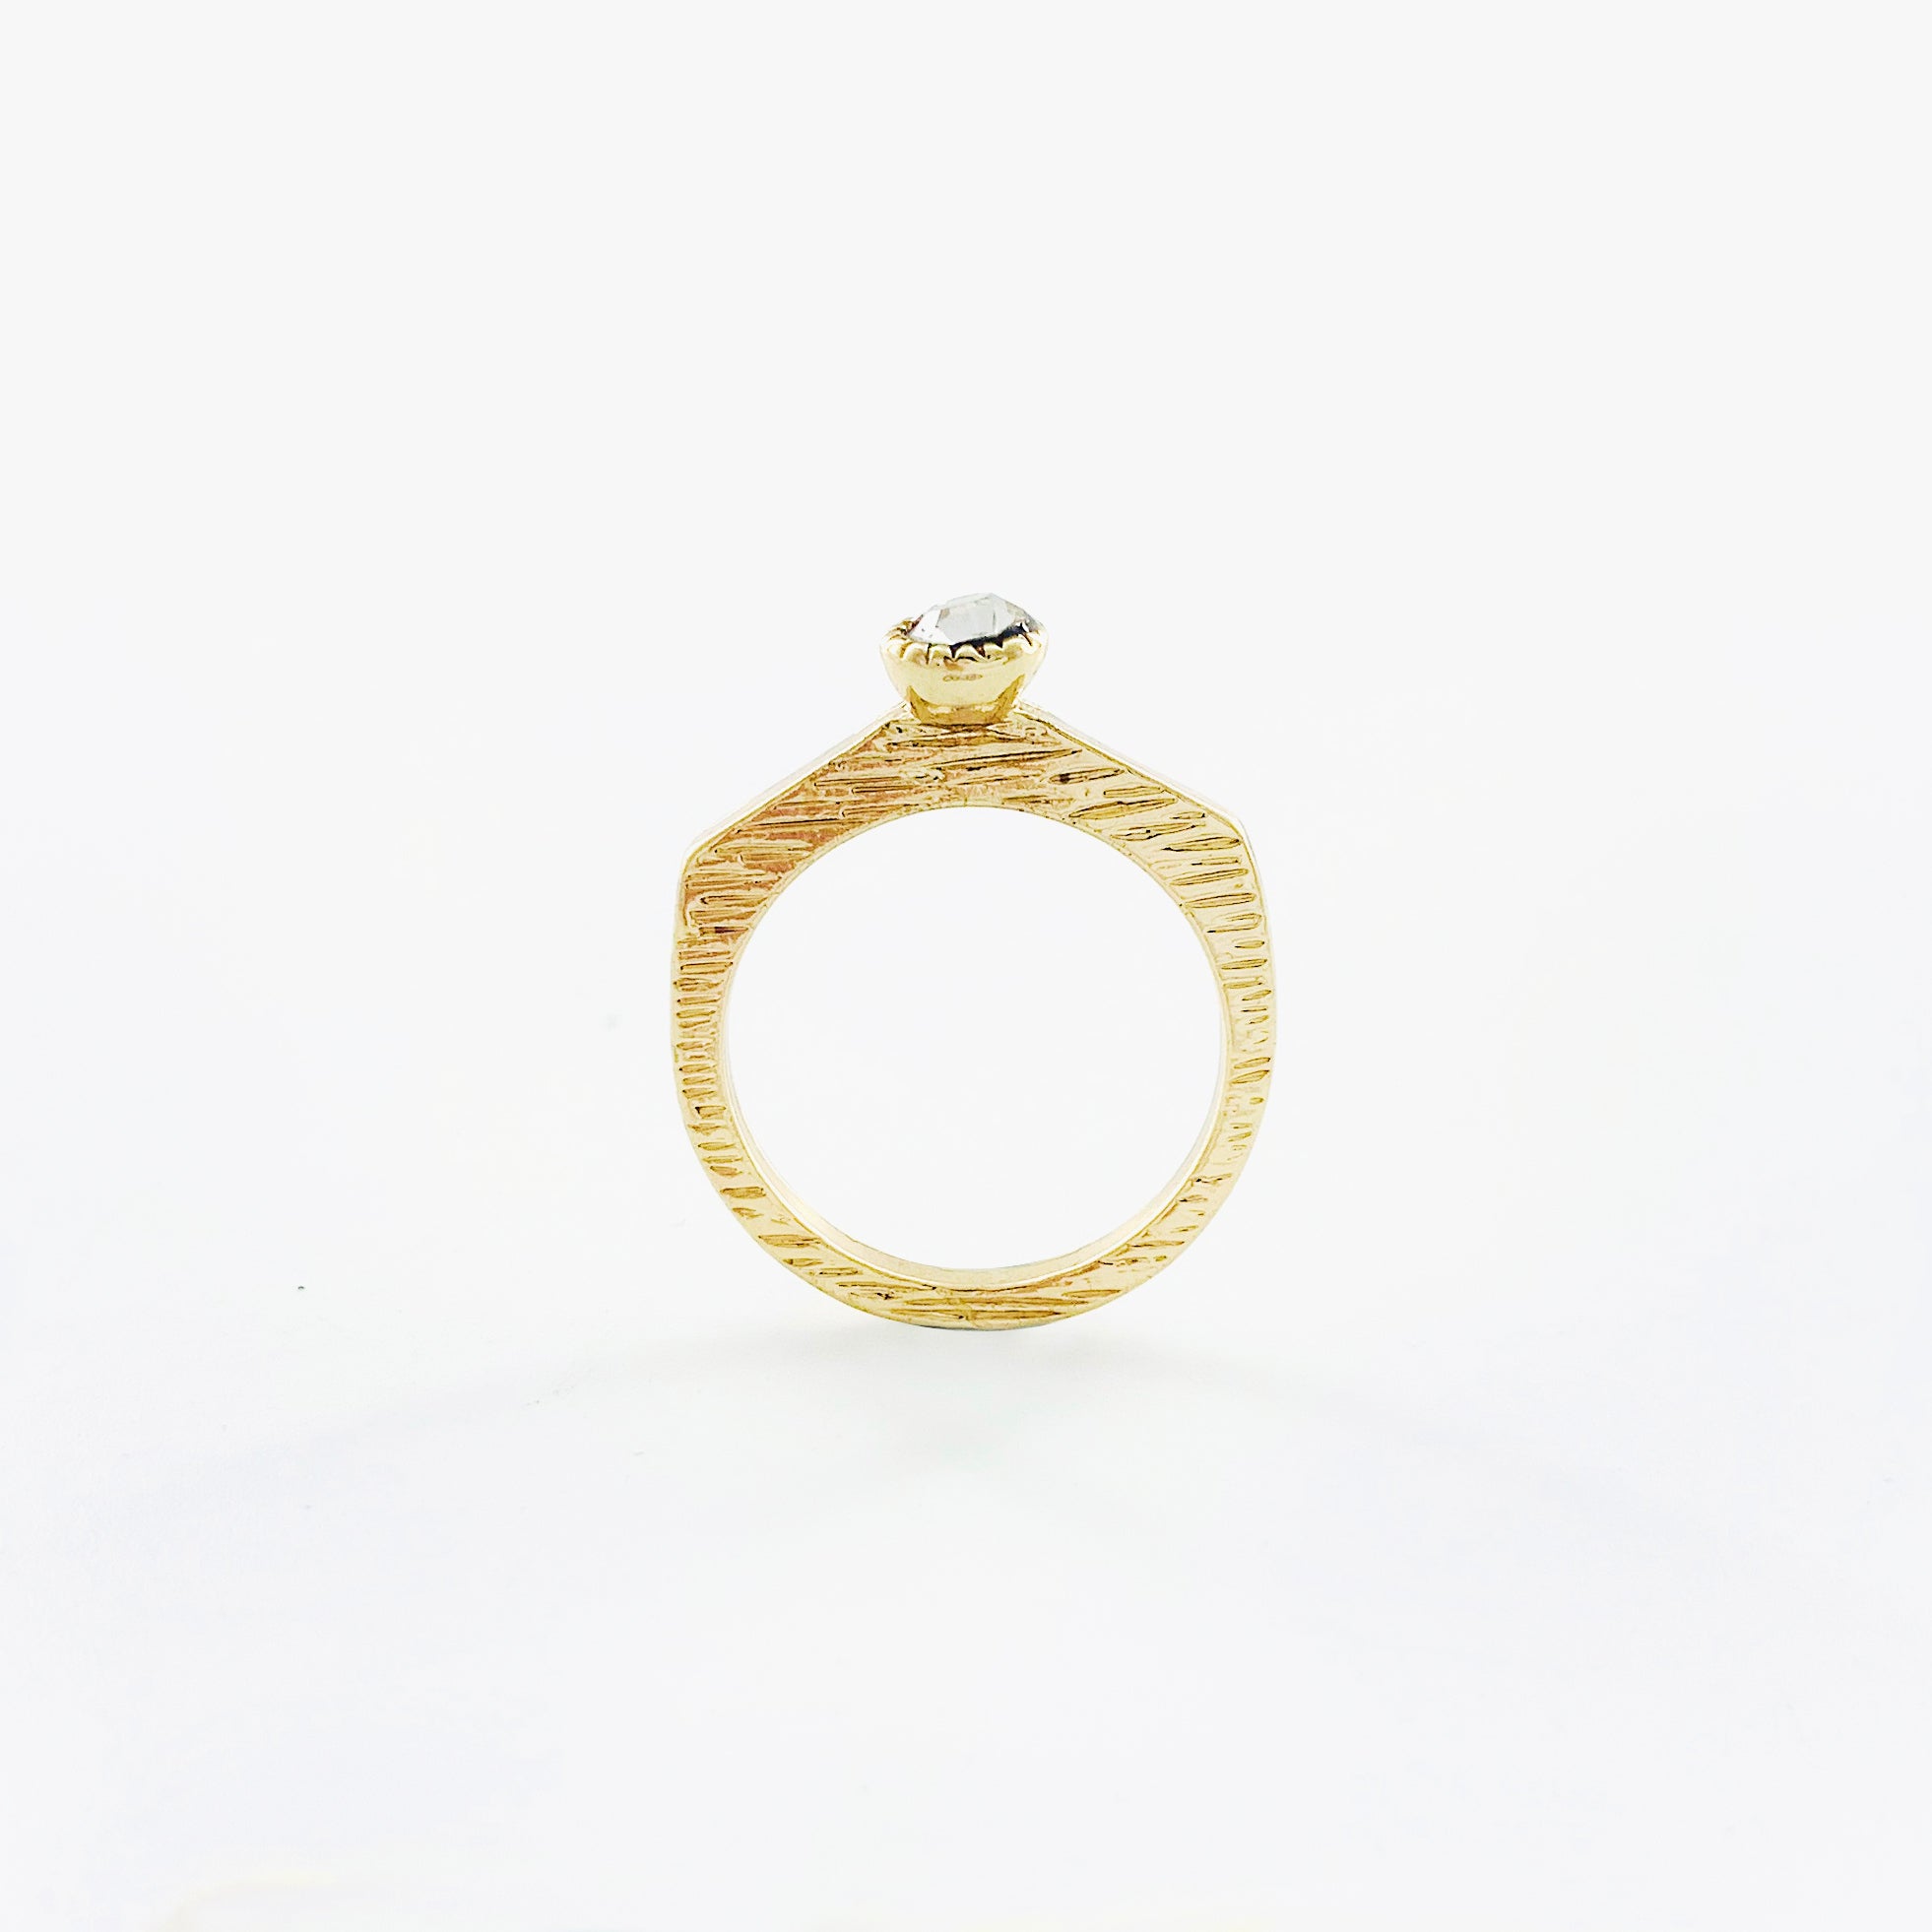 Textured gold ring with small white stone